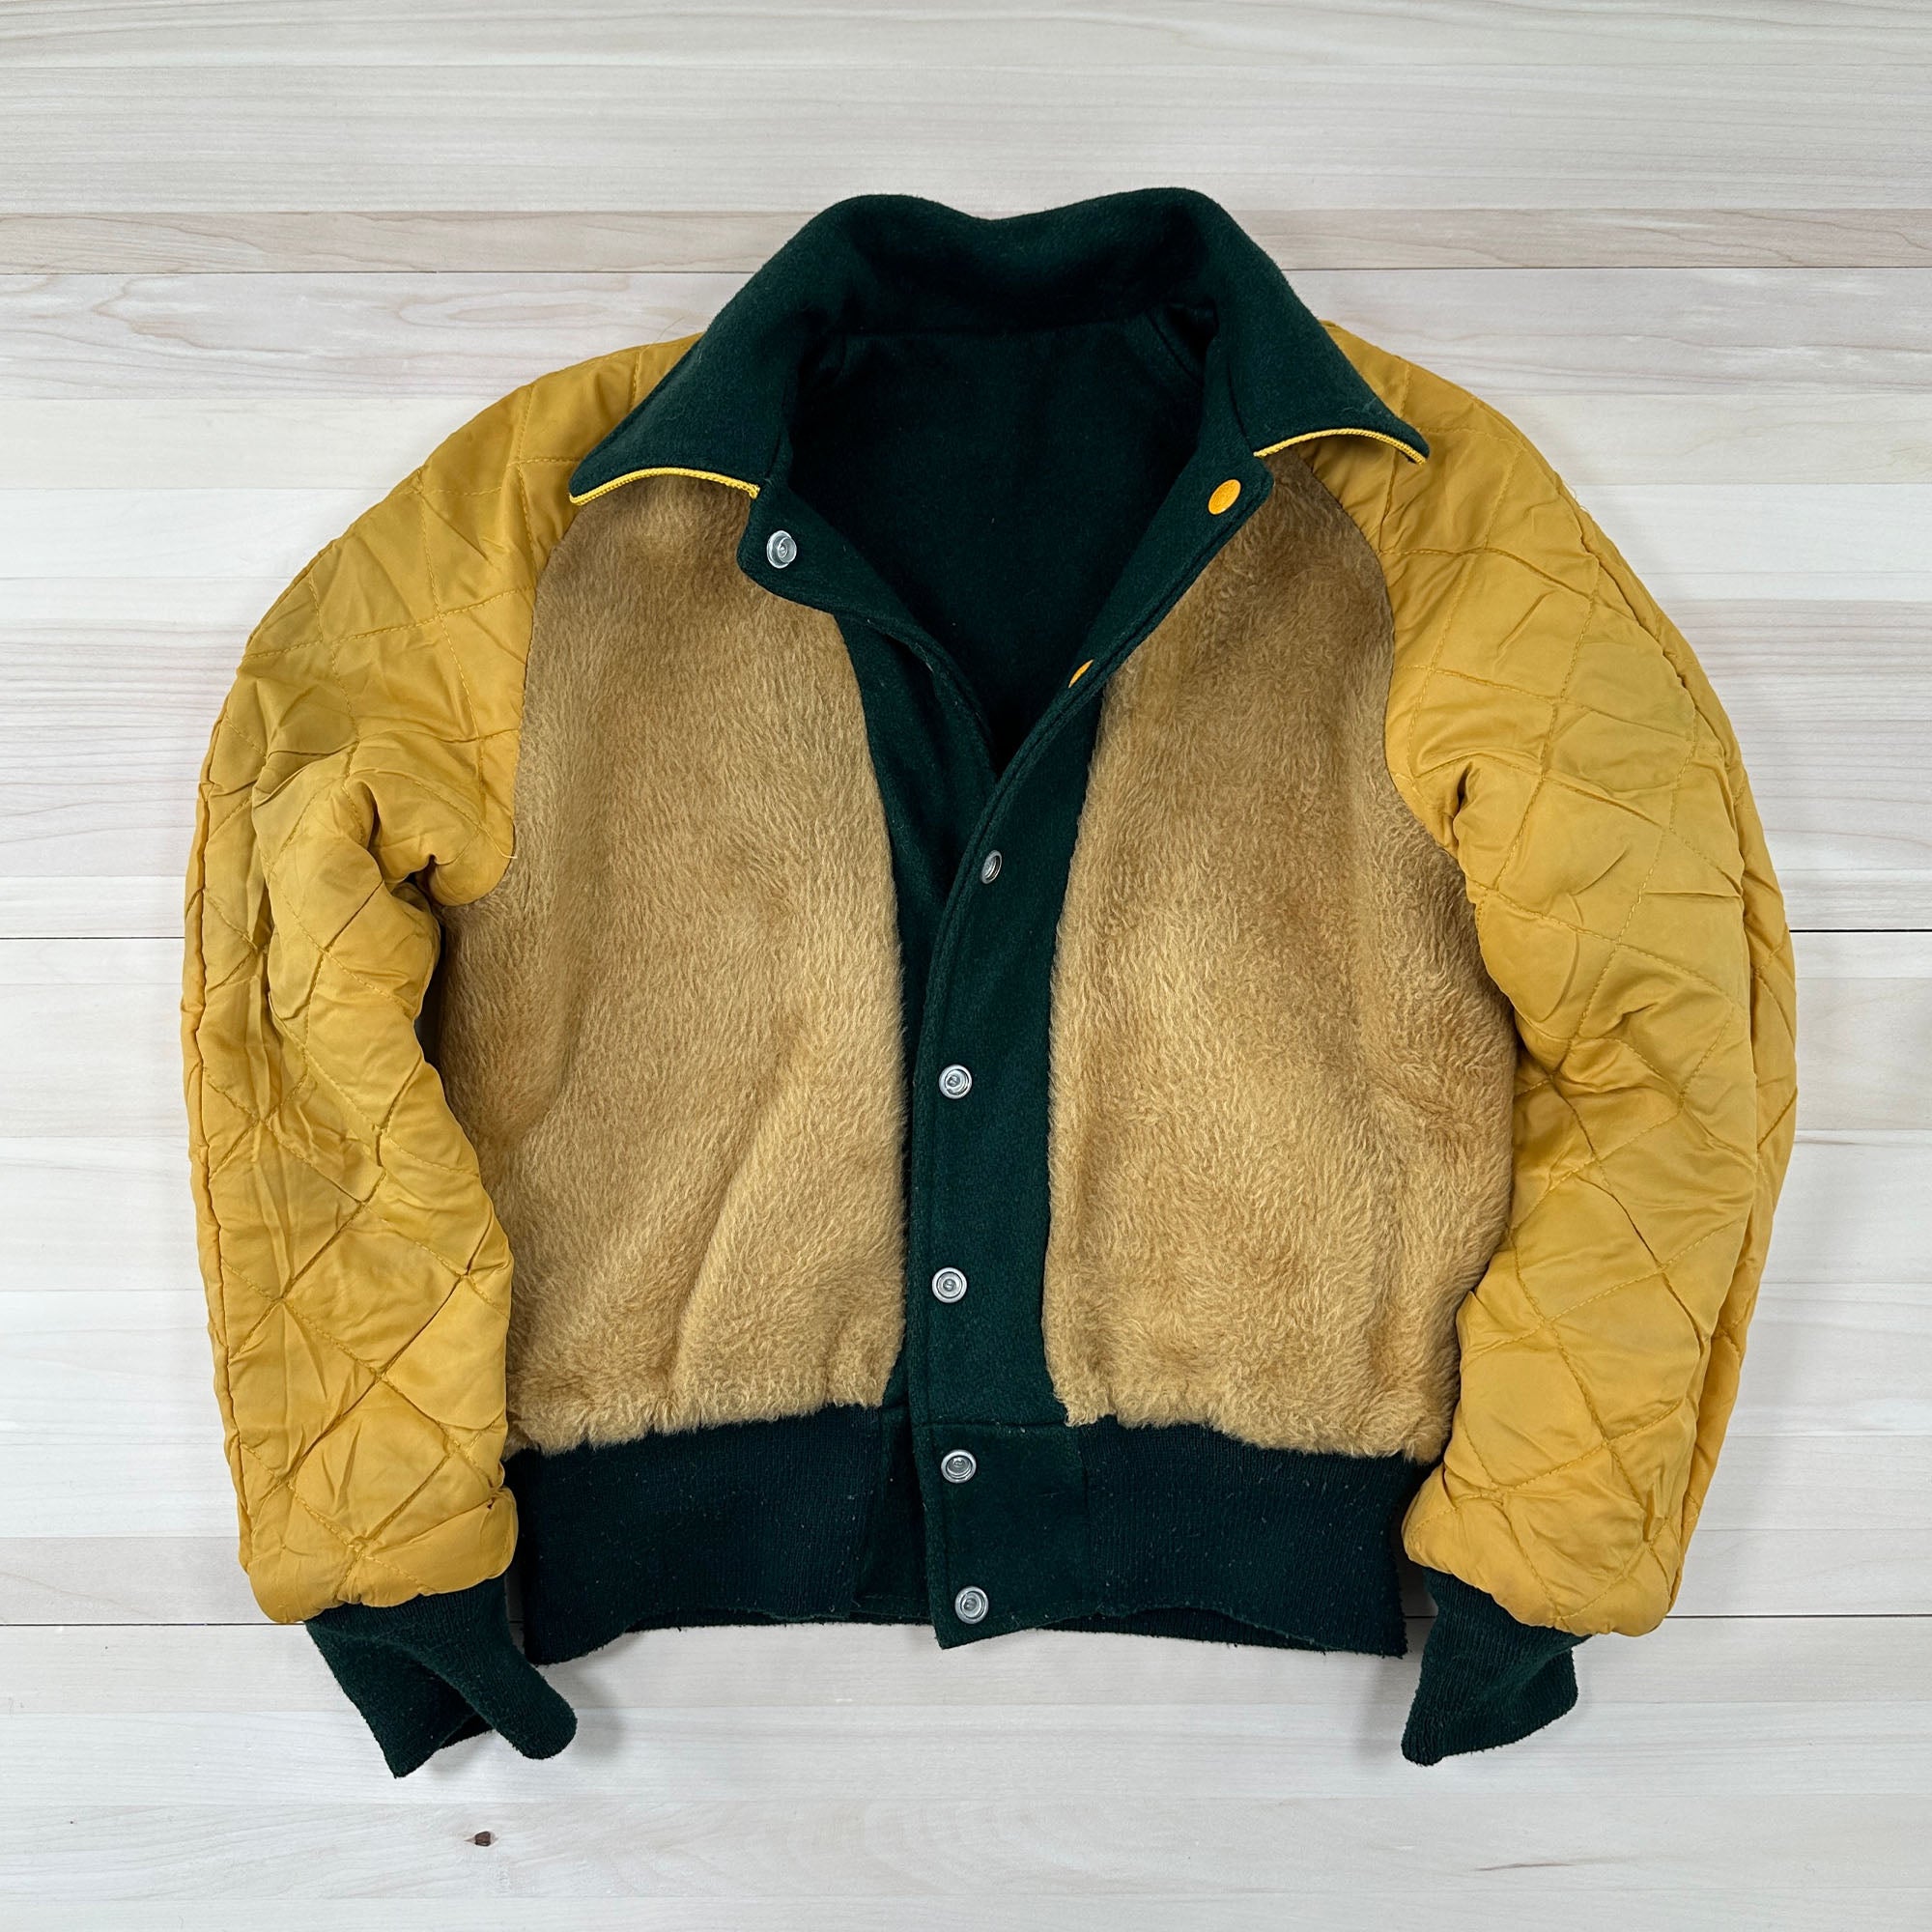 Vintage Maple Wool Varsity Jacket Packers Green and Gold - Small-4